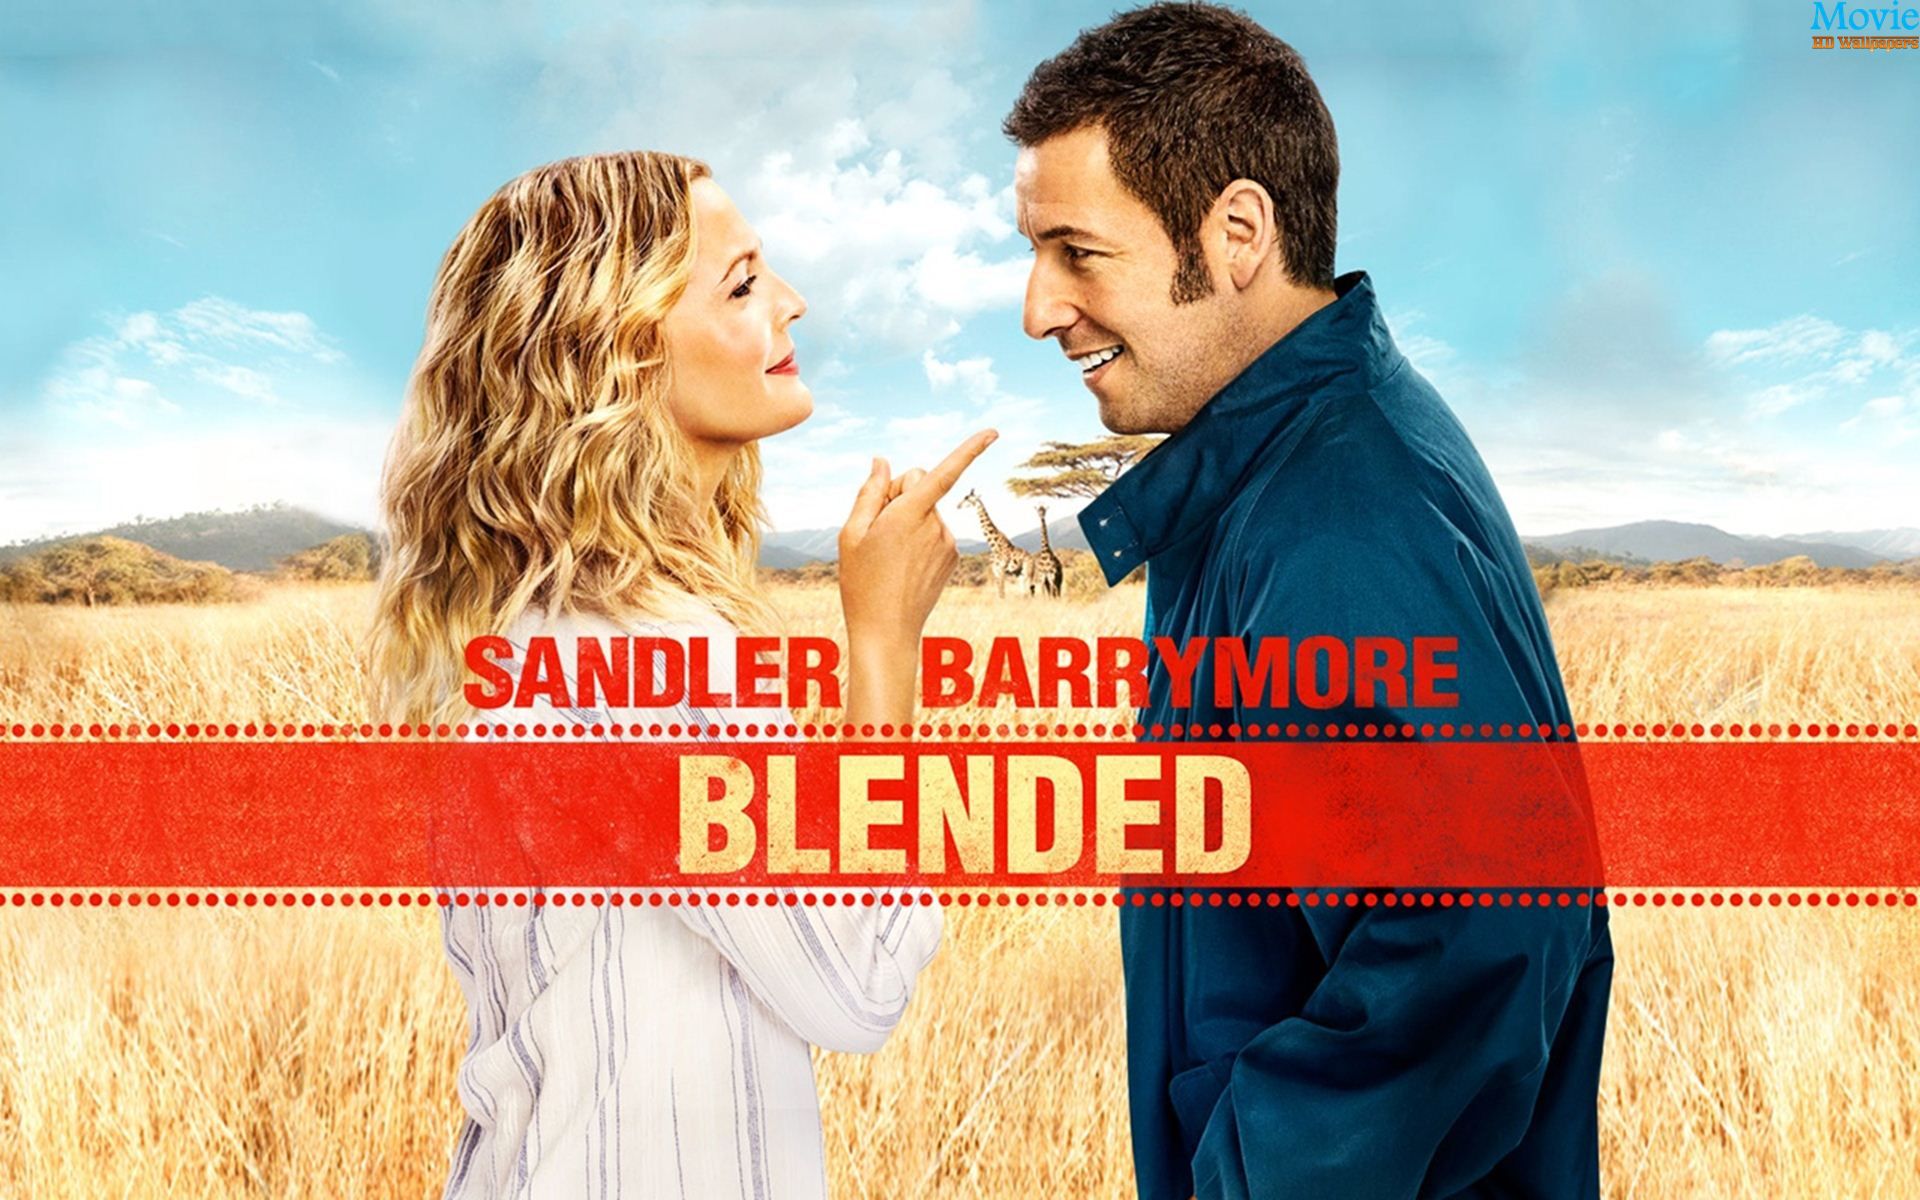 Adam Sandler and Drew Barrymore star in this hilarious family comedy.